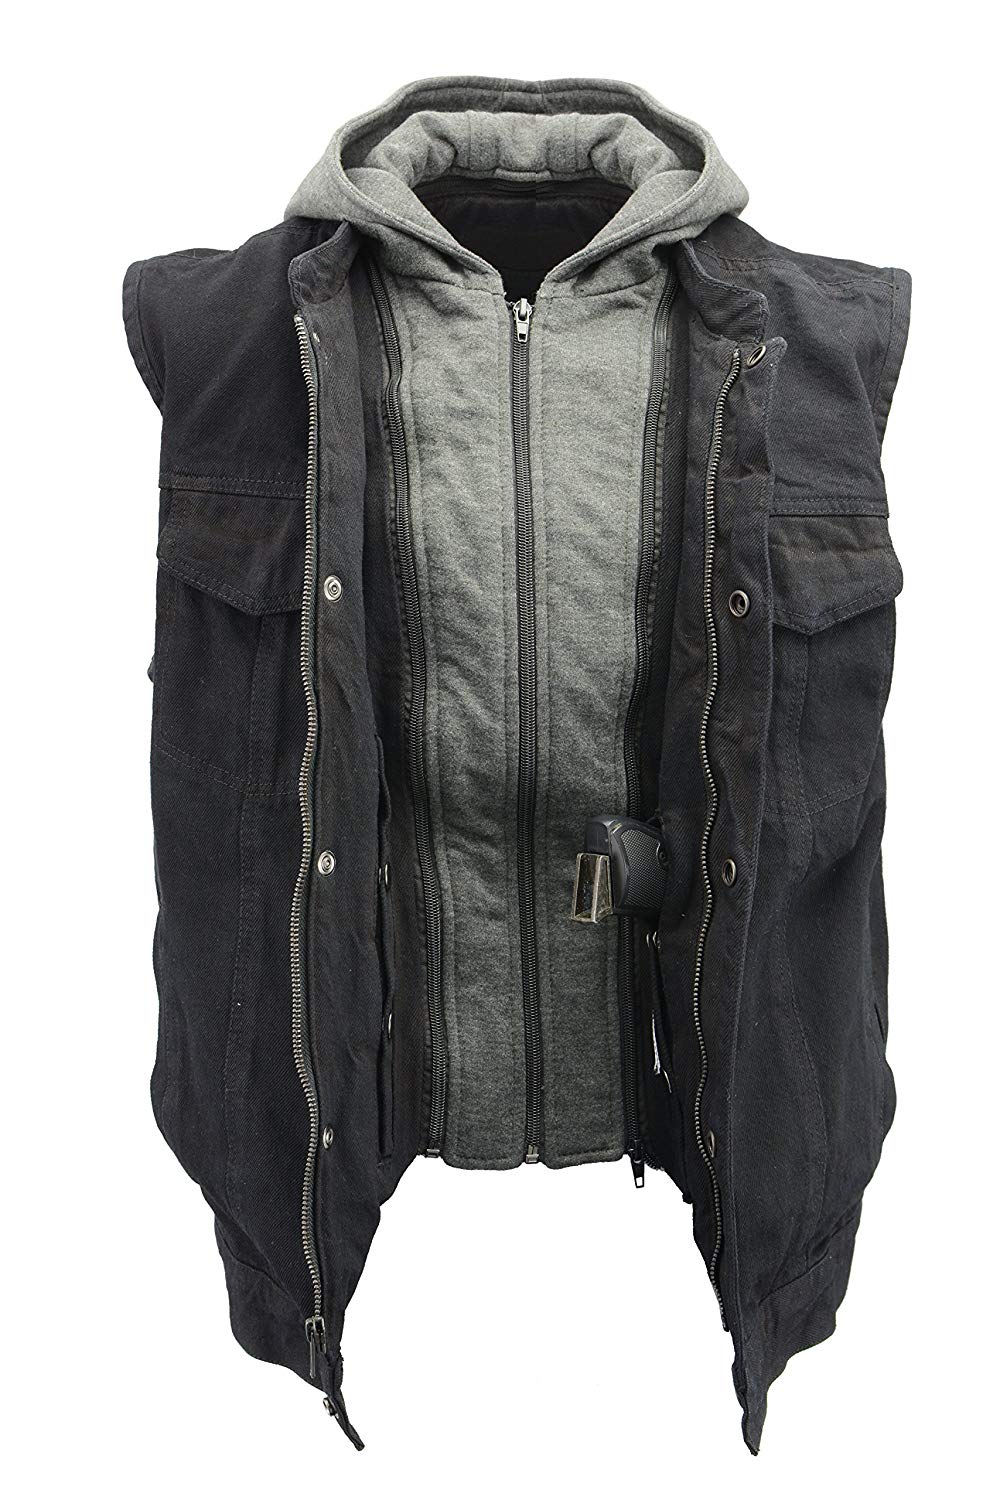 Men’s Denim Rustic and Casual Black Jean Club Style Vest with Removable Hoodie BZ7200